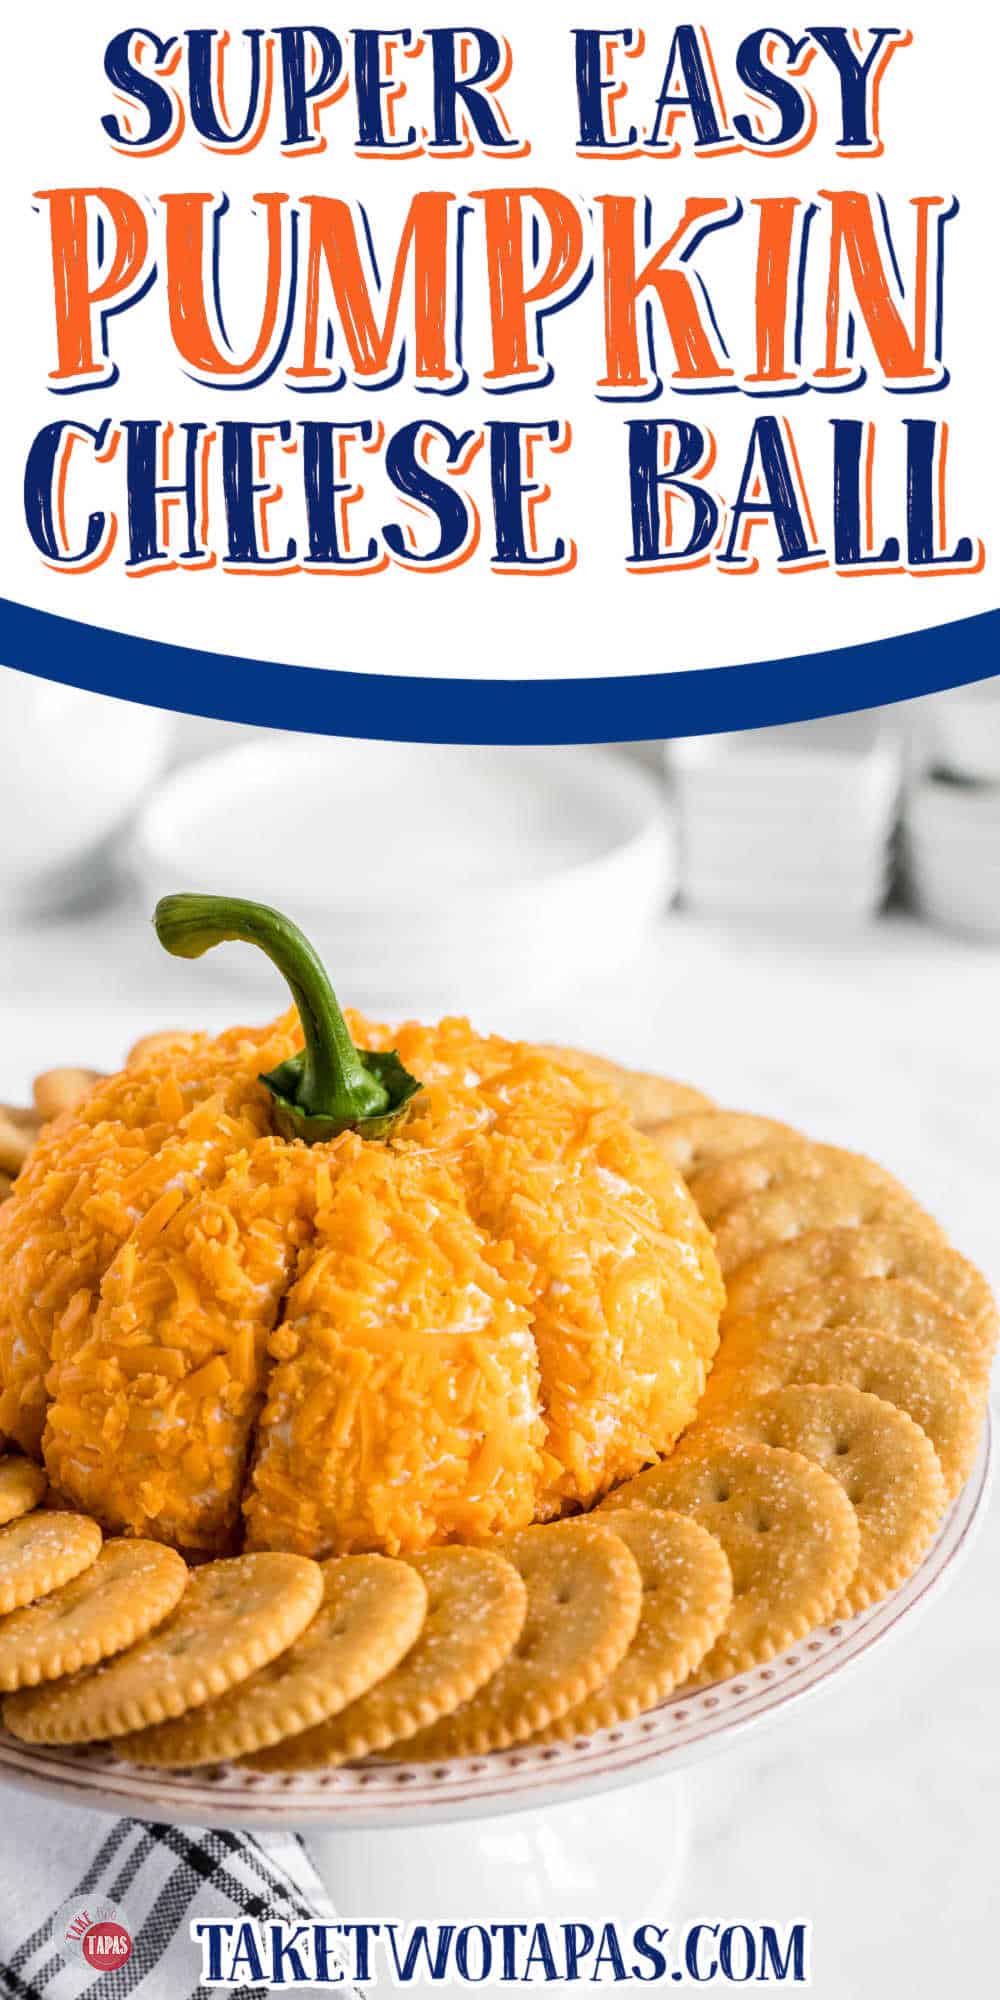 pumpkin cheese ball with white banner and text